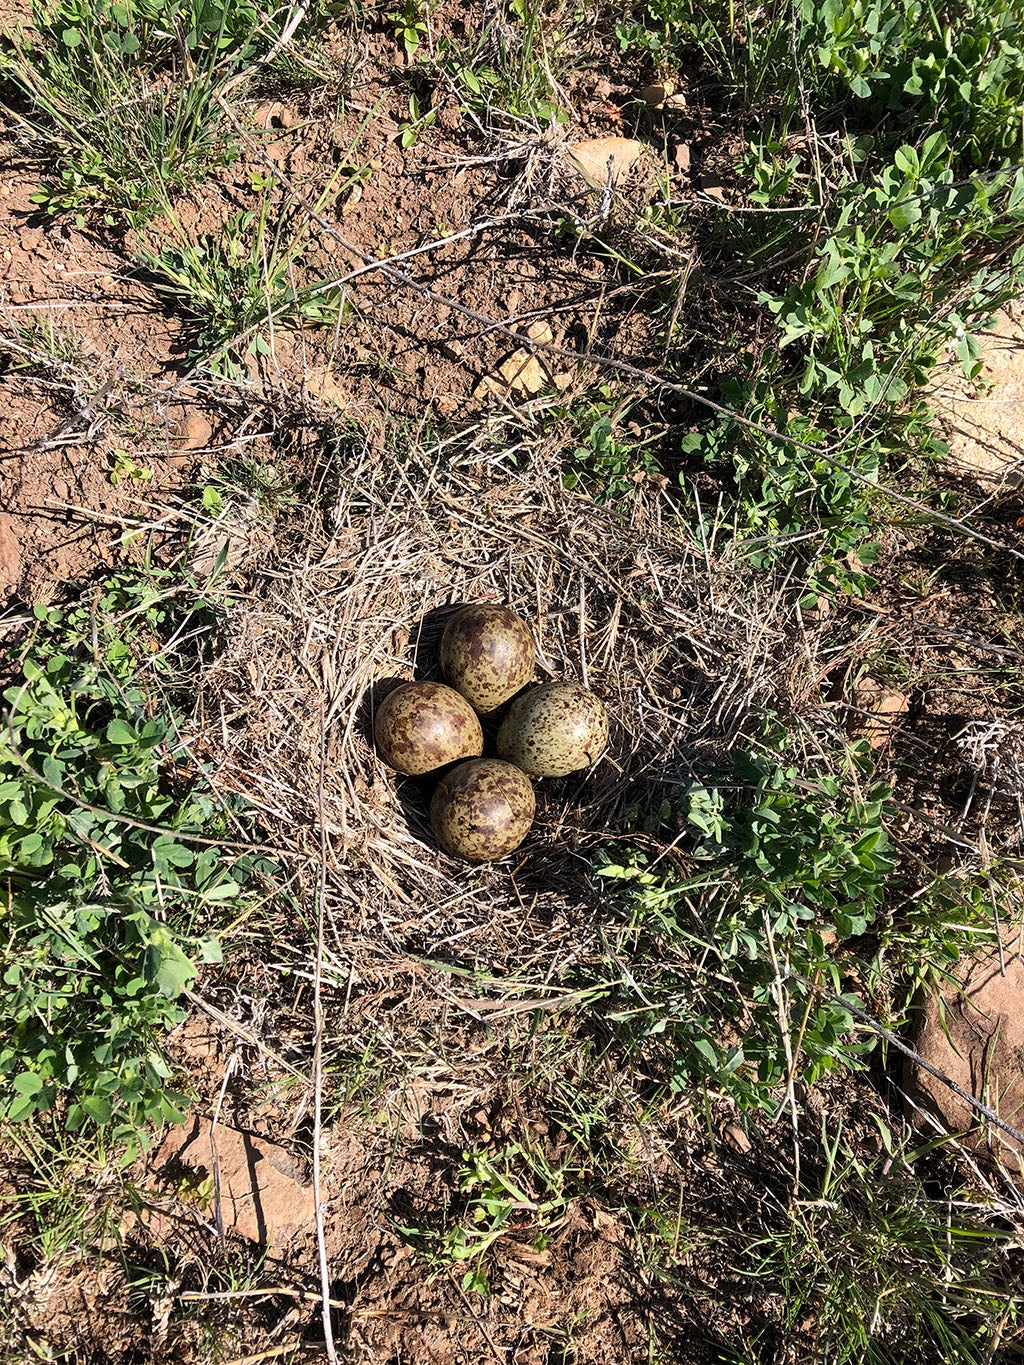 4 dull greenish eggs with brown spots in a ground nest